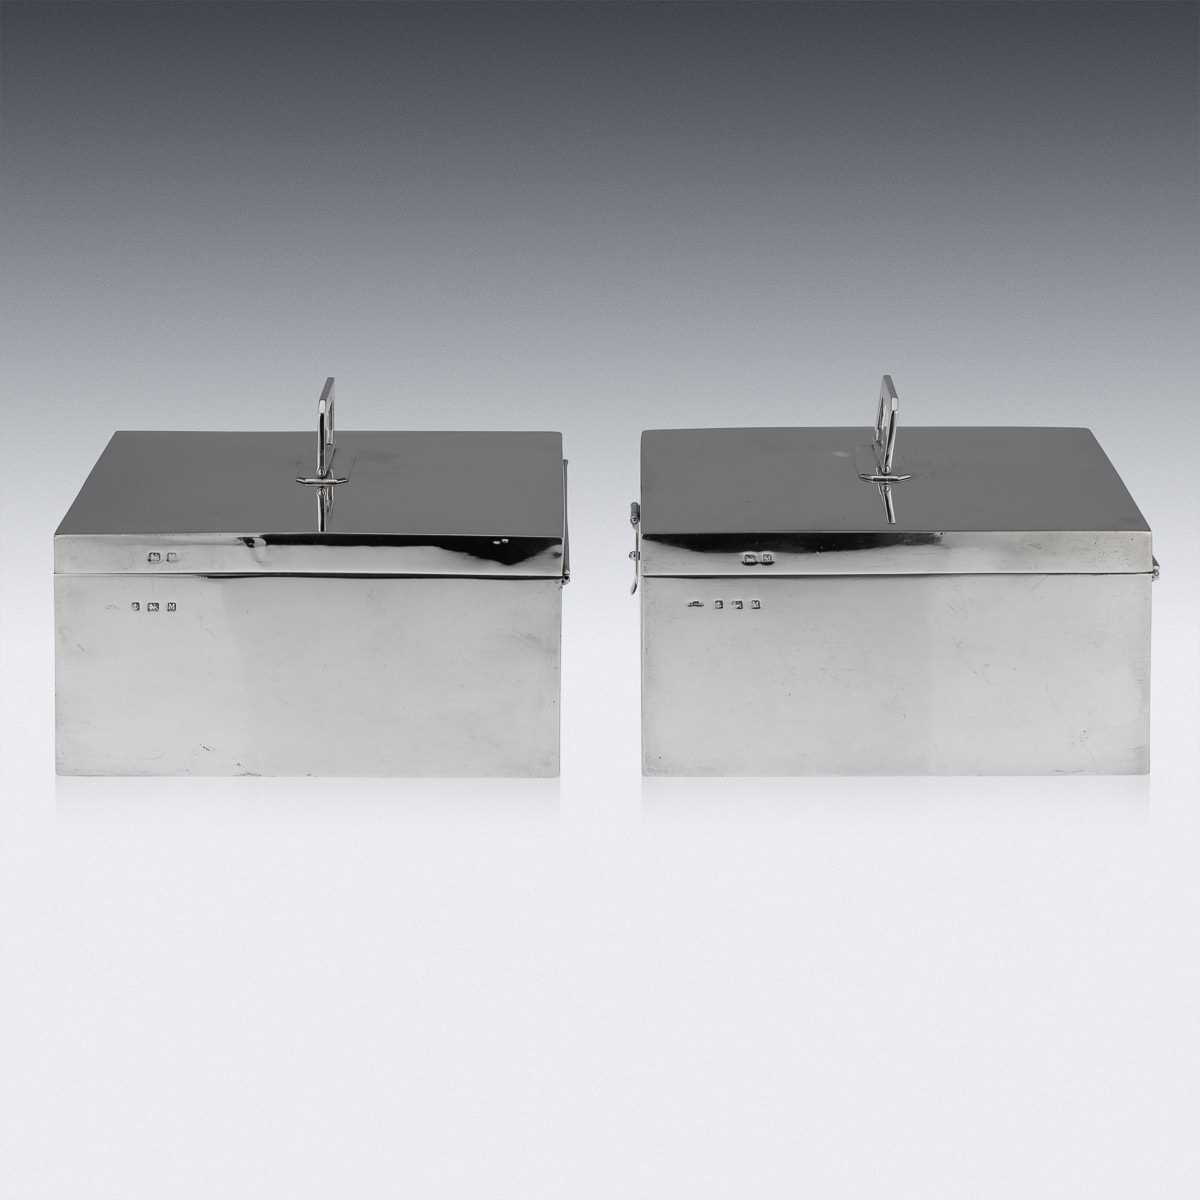 ASPREY & CO. : A PAIR OF STERLING SILVER ART DECO CIGAR BOXES, C. 1936 - Image 3 of 14